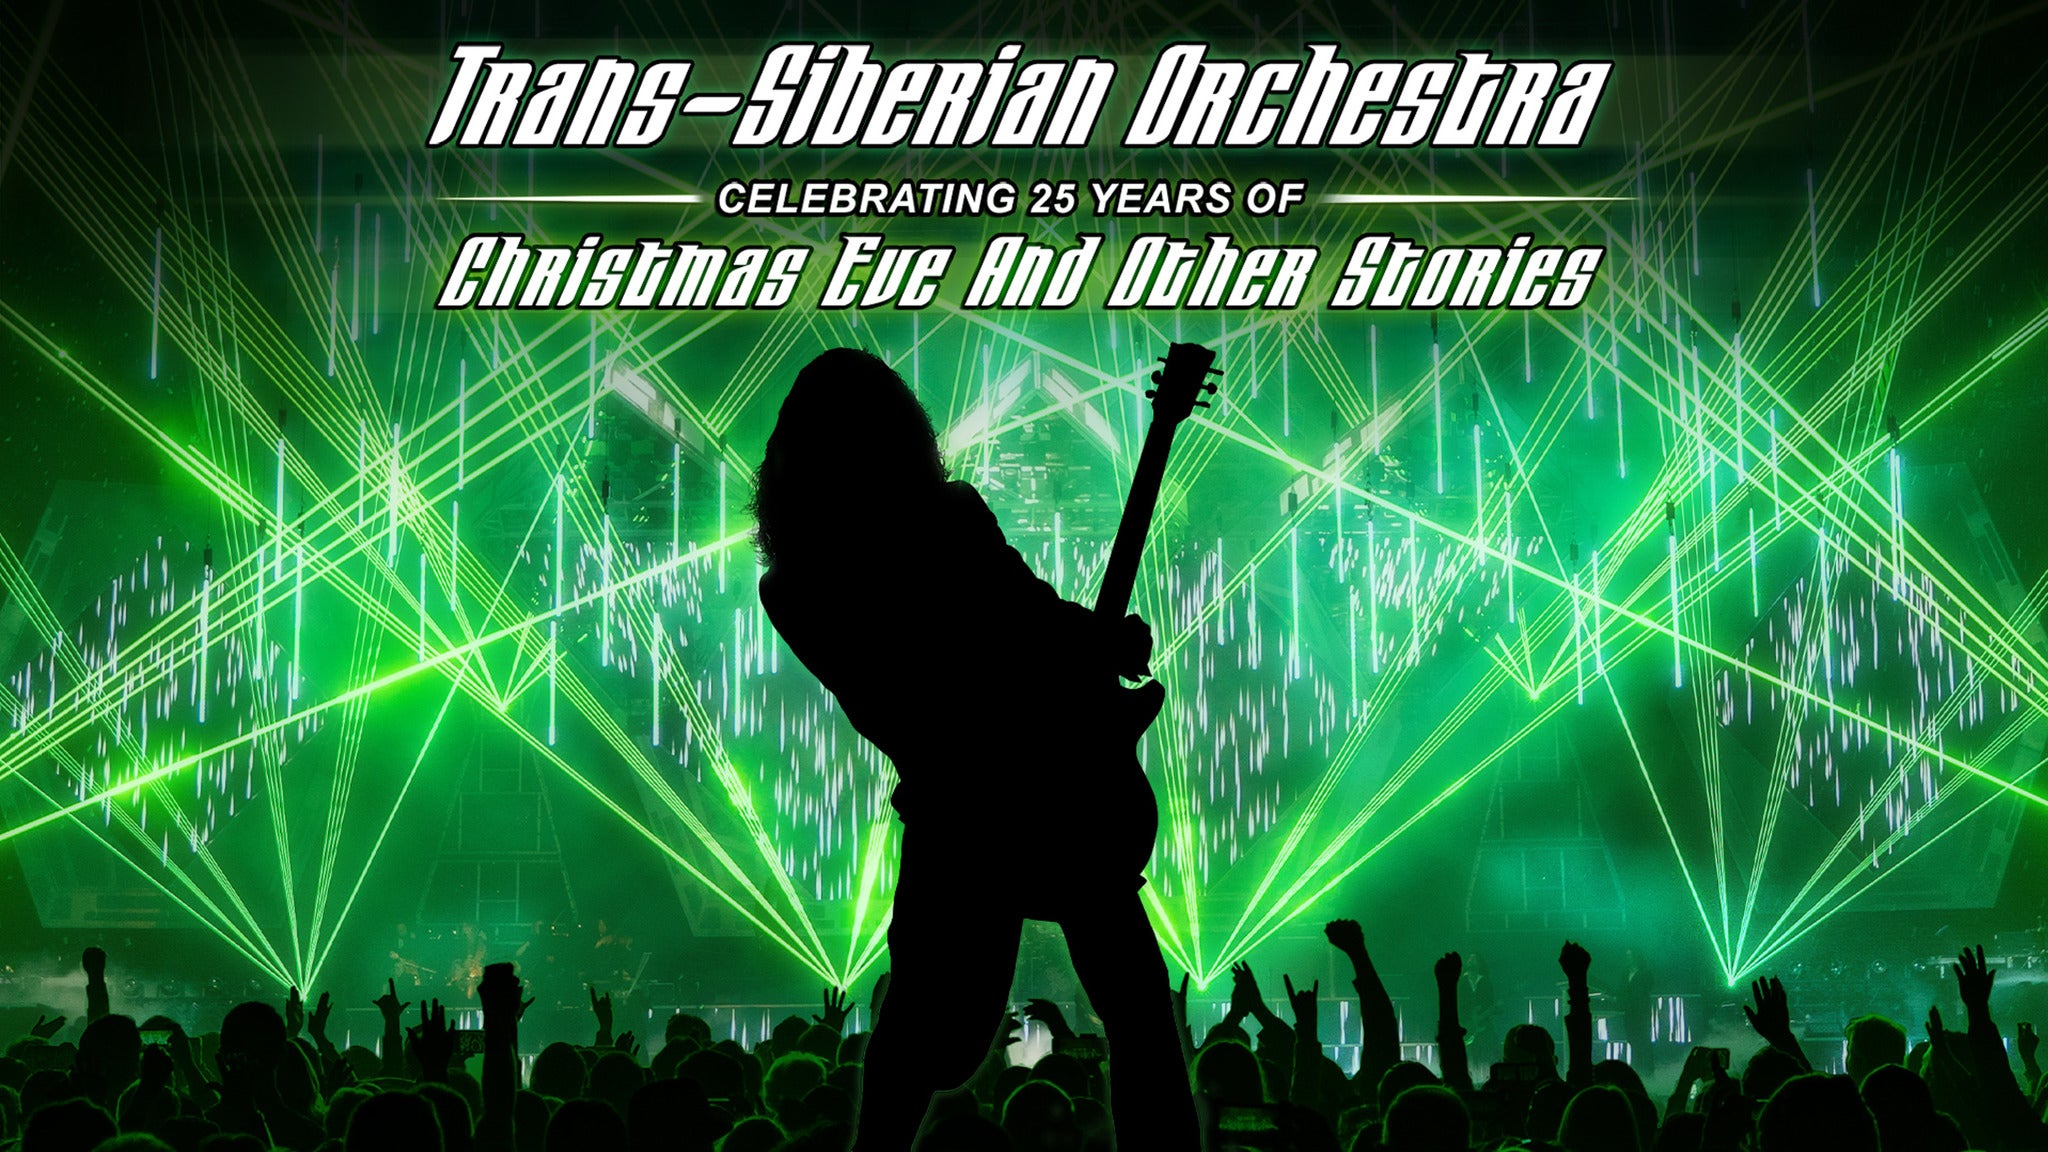 Trans-Siberian Orchestra-Christmas Eve & Other Stories in Orlando promo photo for Ticketmaster presale offer code